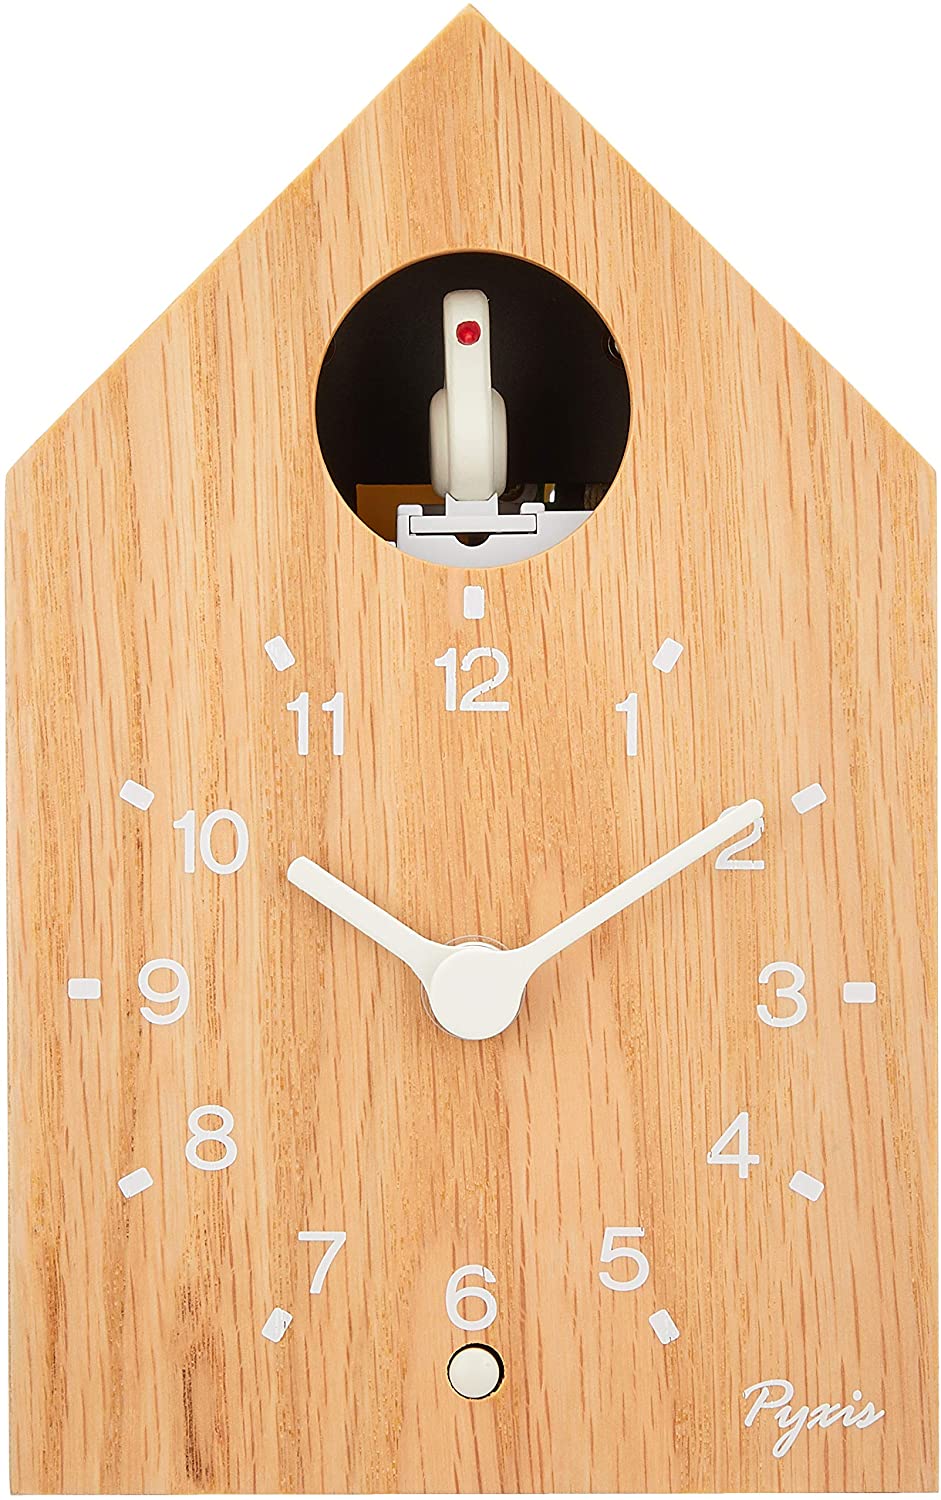 SEIKO wall clock table clock combined analog cuckoo clock counting PYXIS  Pixis wooden frame natural color wood NA609A SEIKO - Discovery Japan Mall